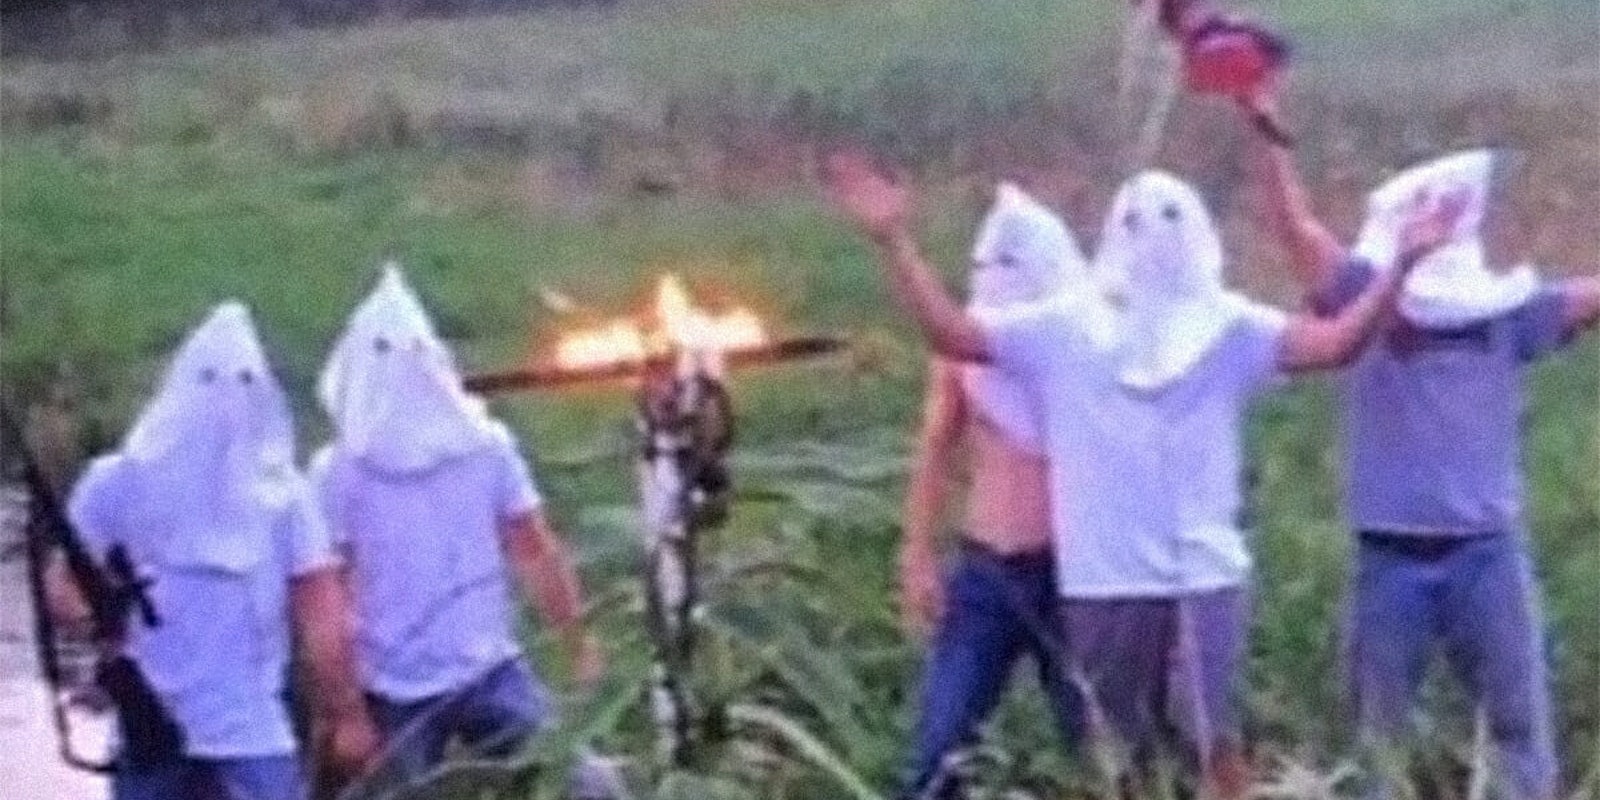 High school students in KKK regalia posing with rifle, burning cross, and confederate flag